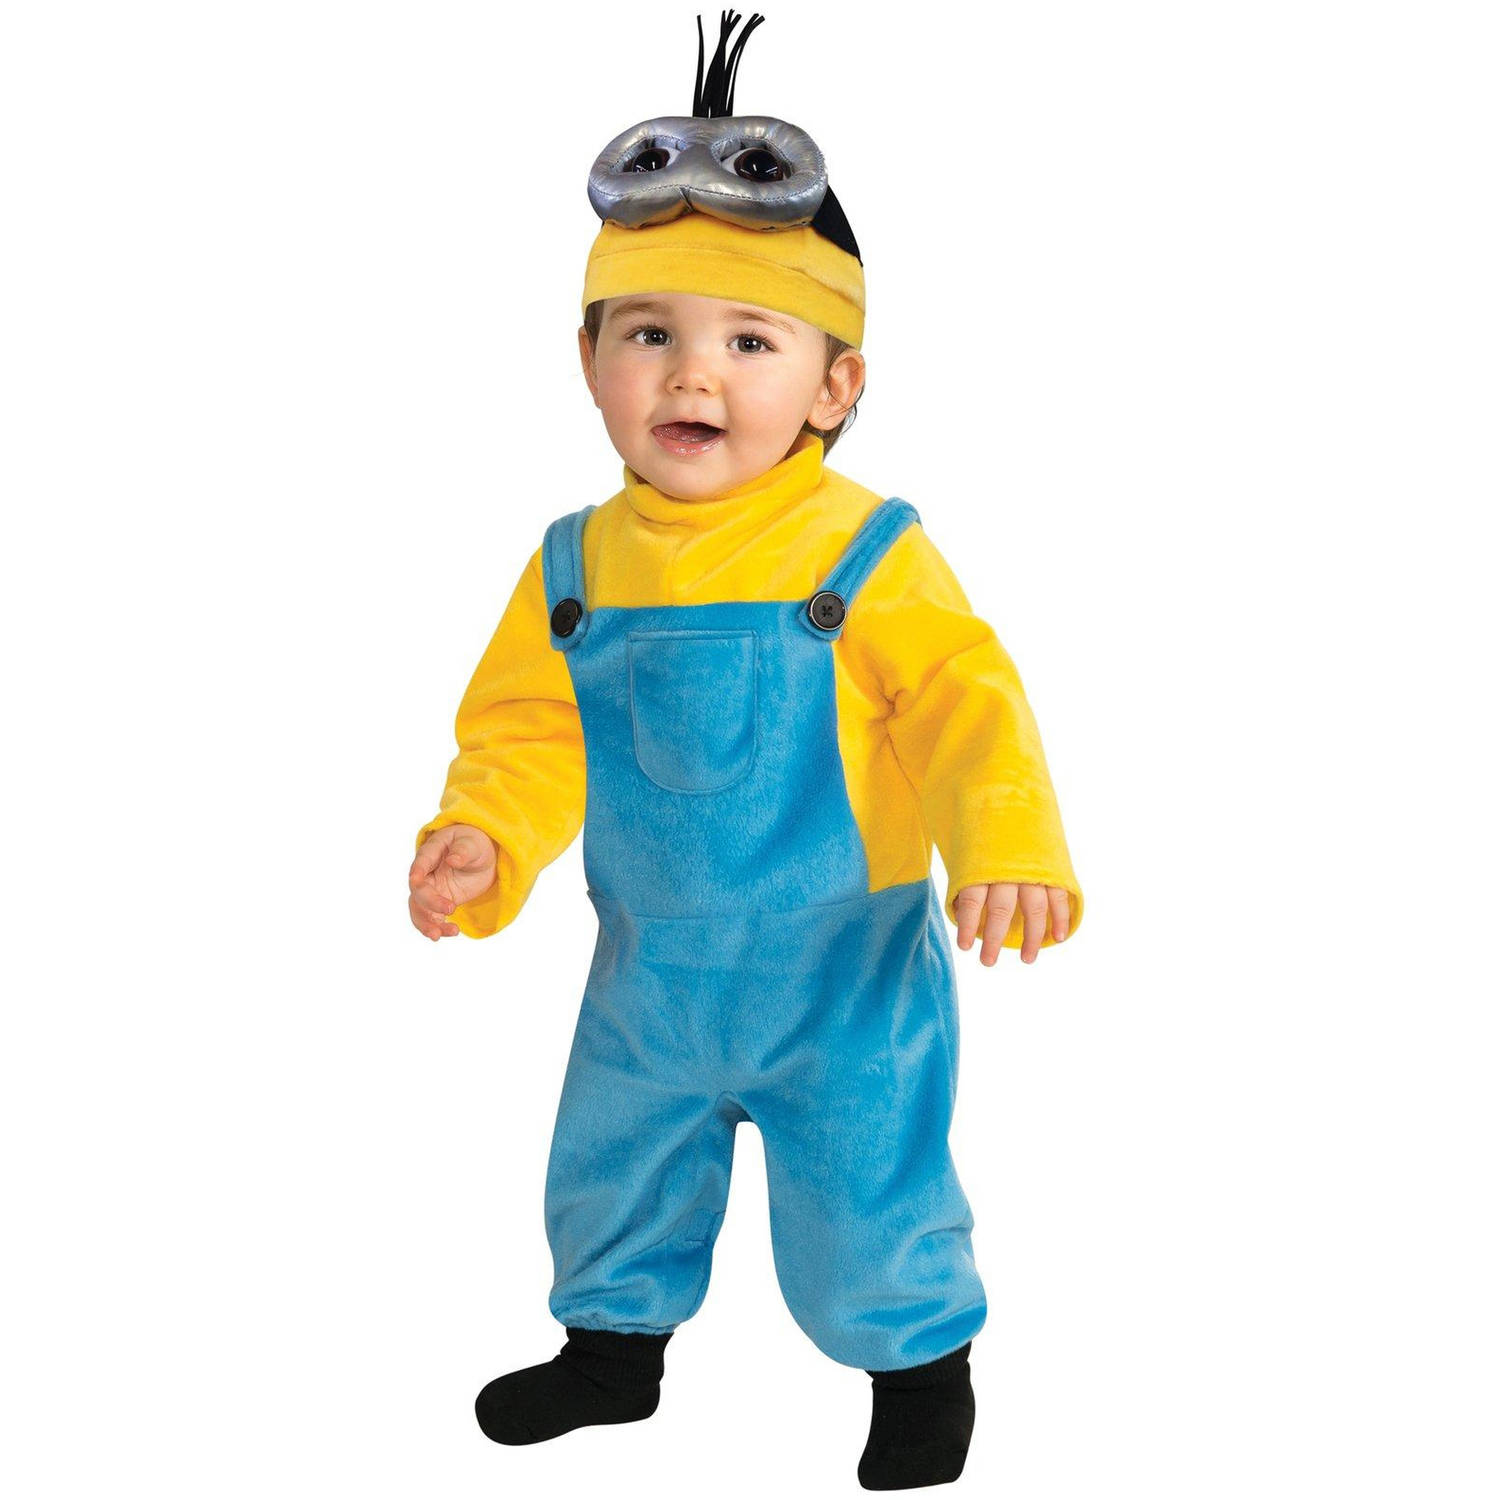 Minion Kevin Toddler Halloween Costume - image 1 of 2